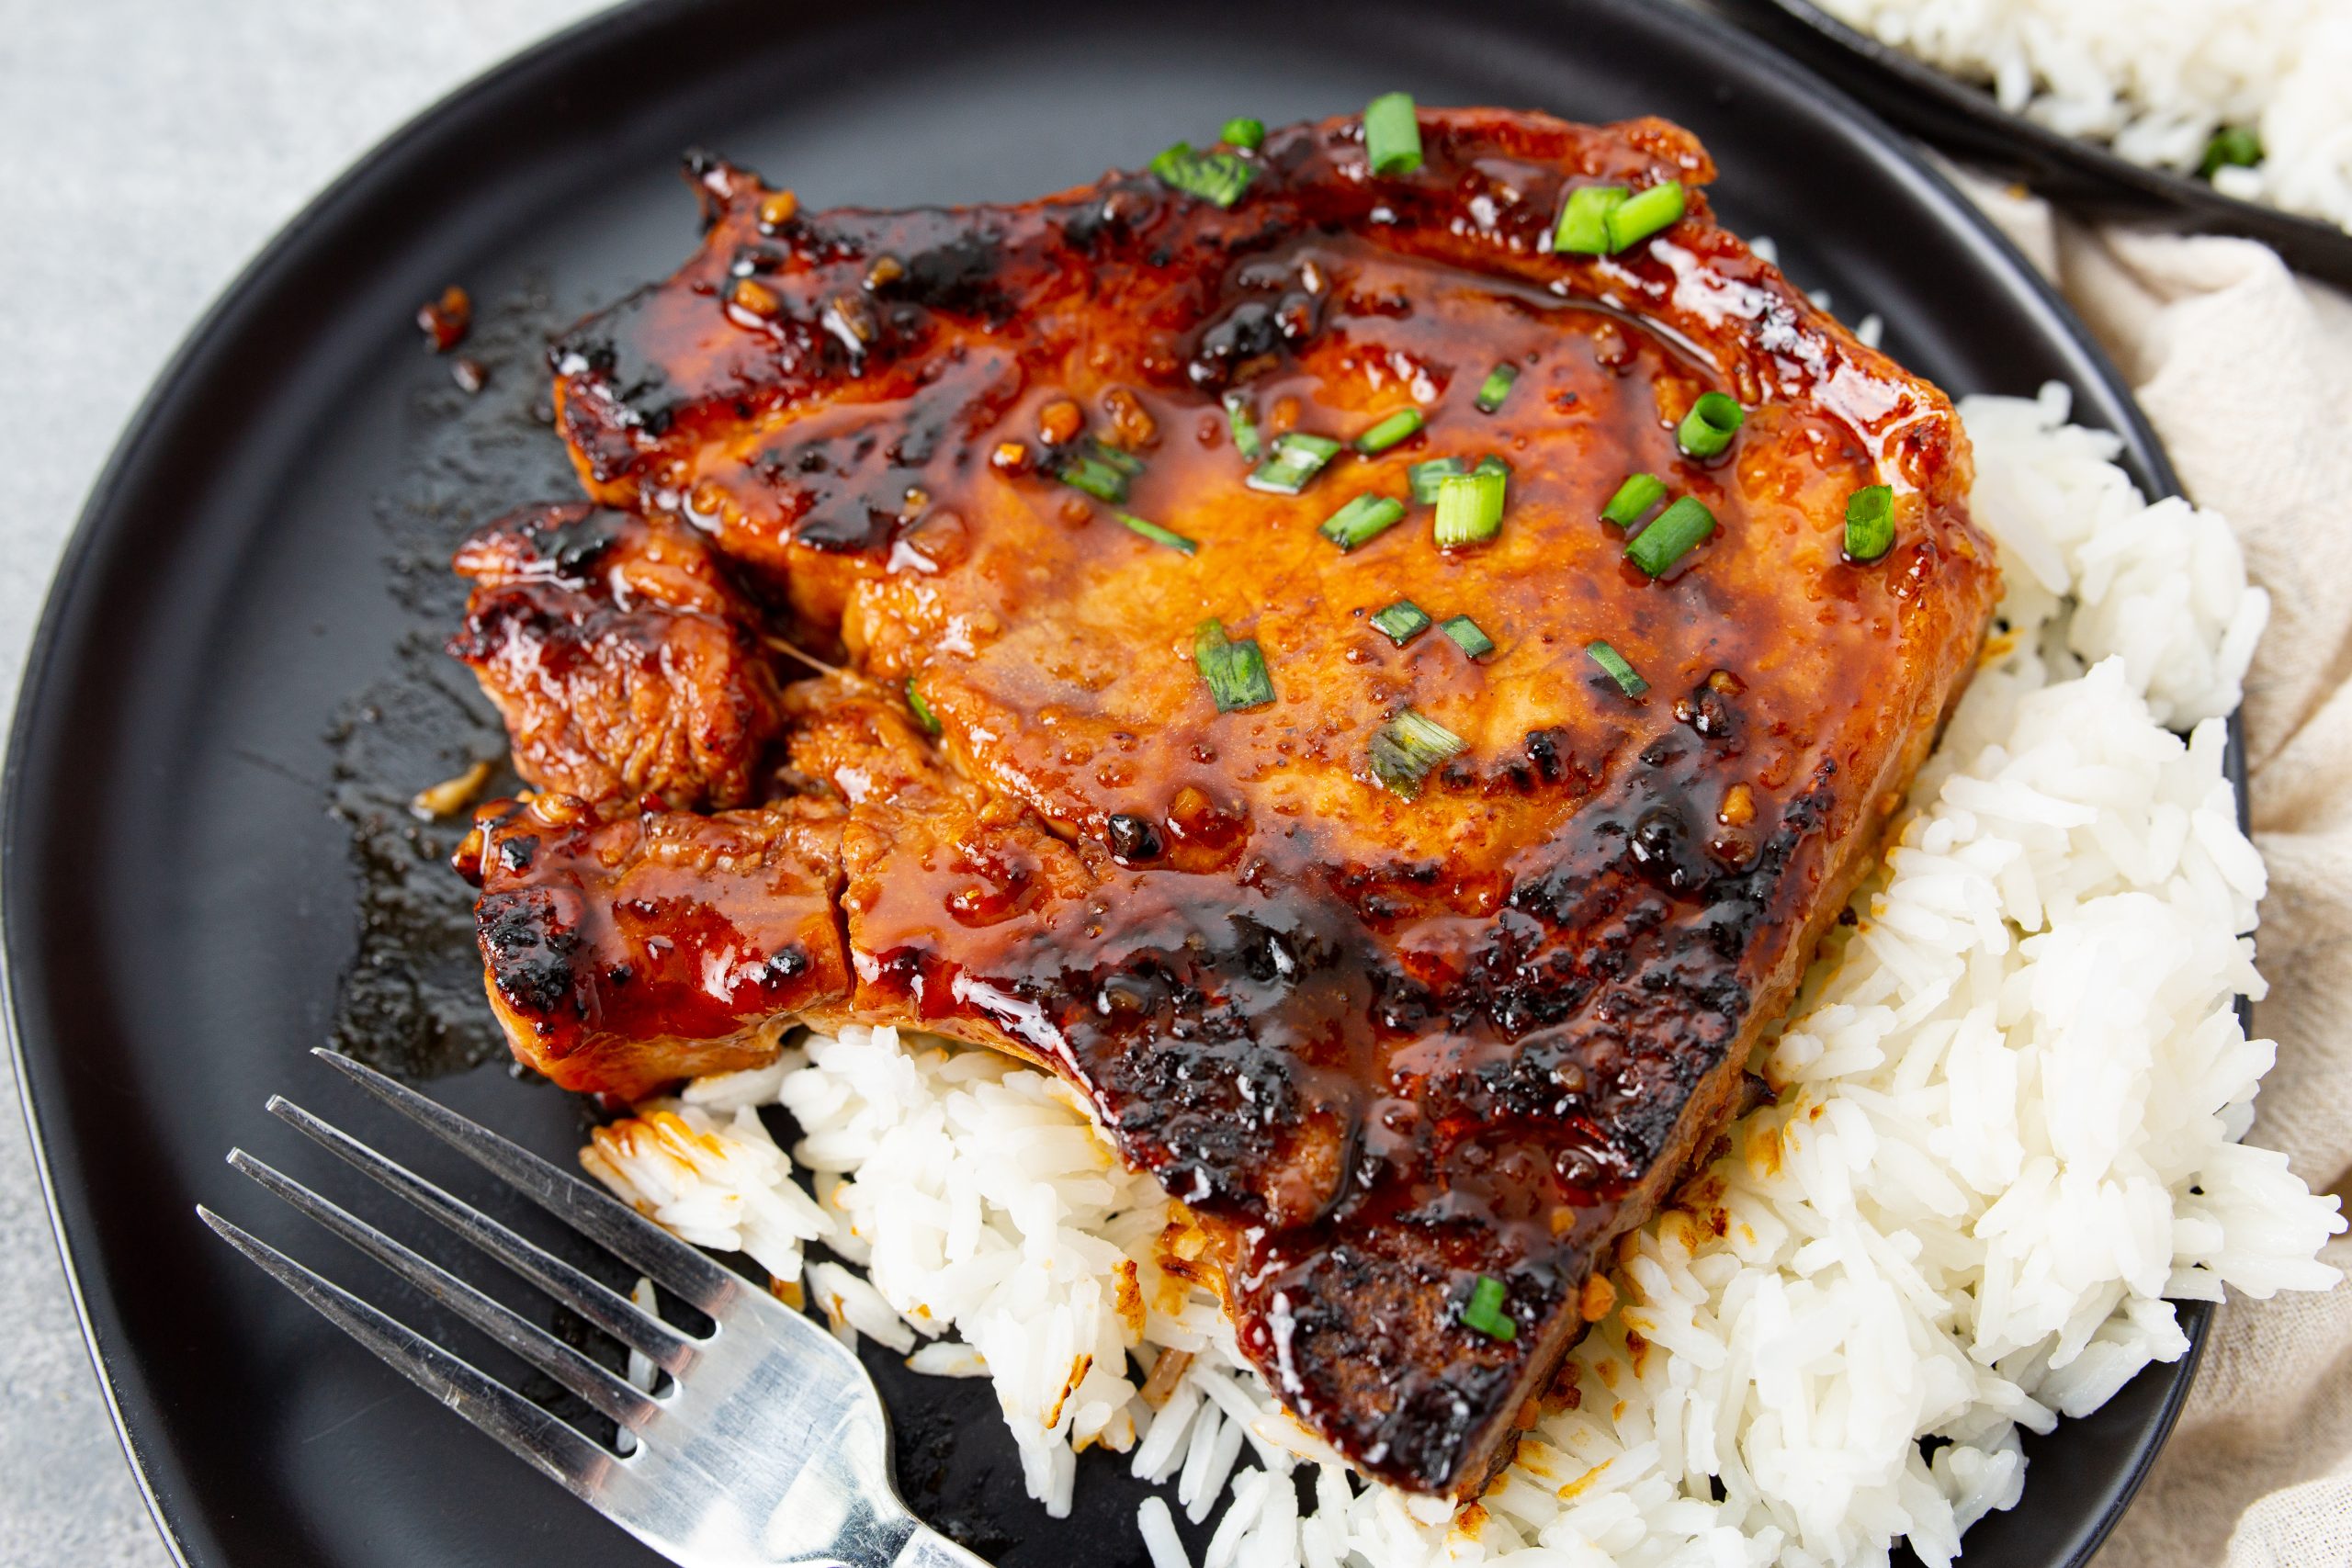 A grilled pork chop glazed with sauce is served on white rice with chopped green onions on a black plate, next to a fork.